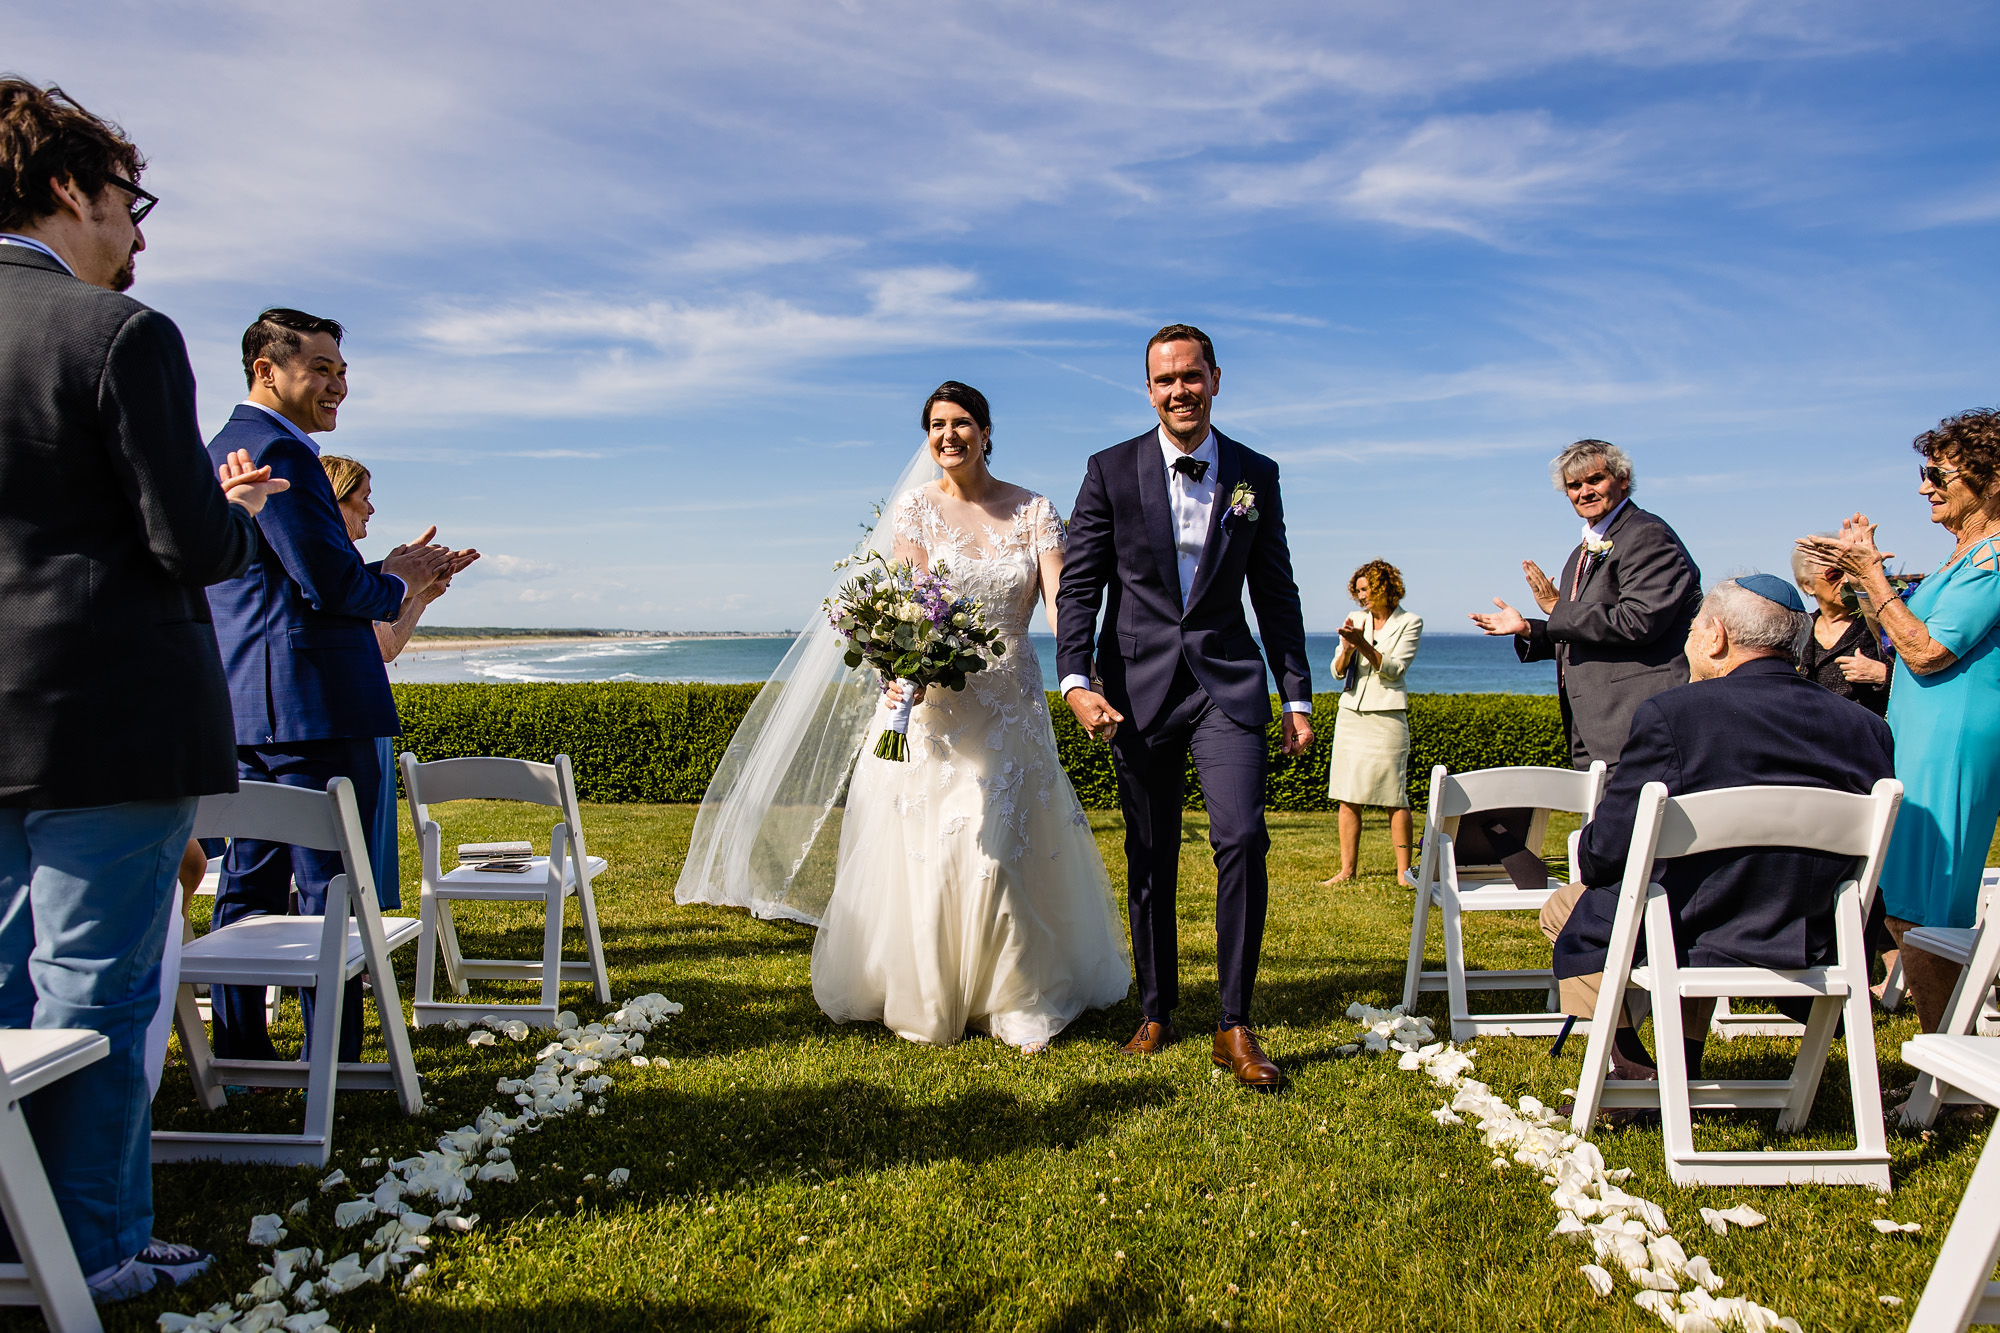 A wedding ceremony at the Beachmere Inn on the Marginal Way in Ogunquit, Maine